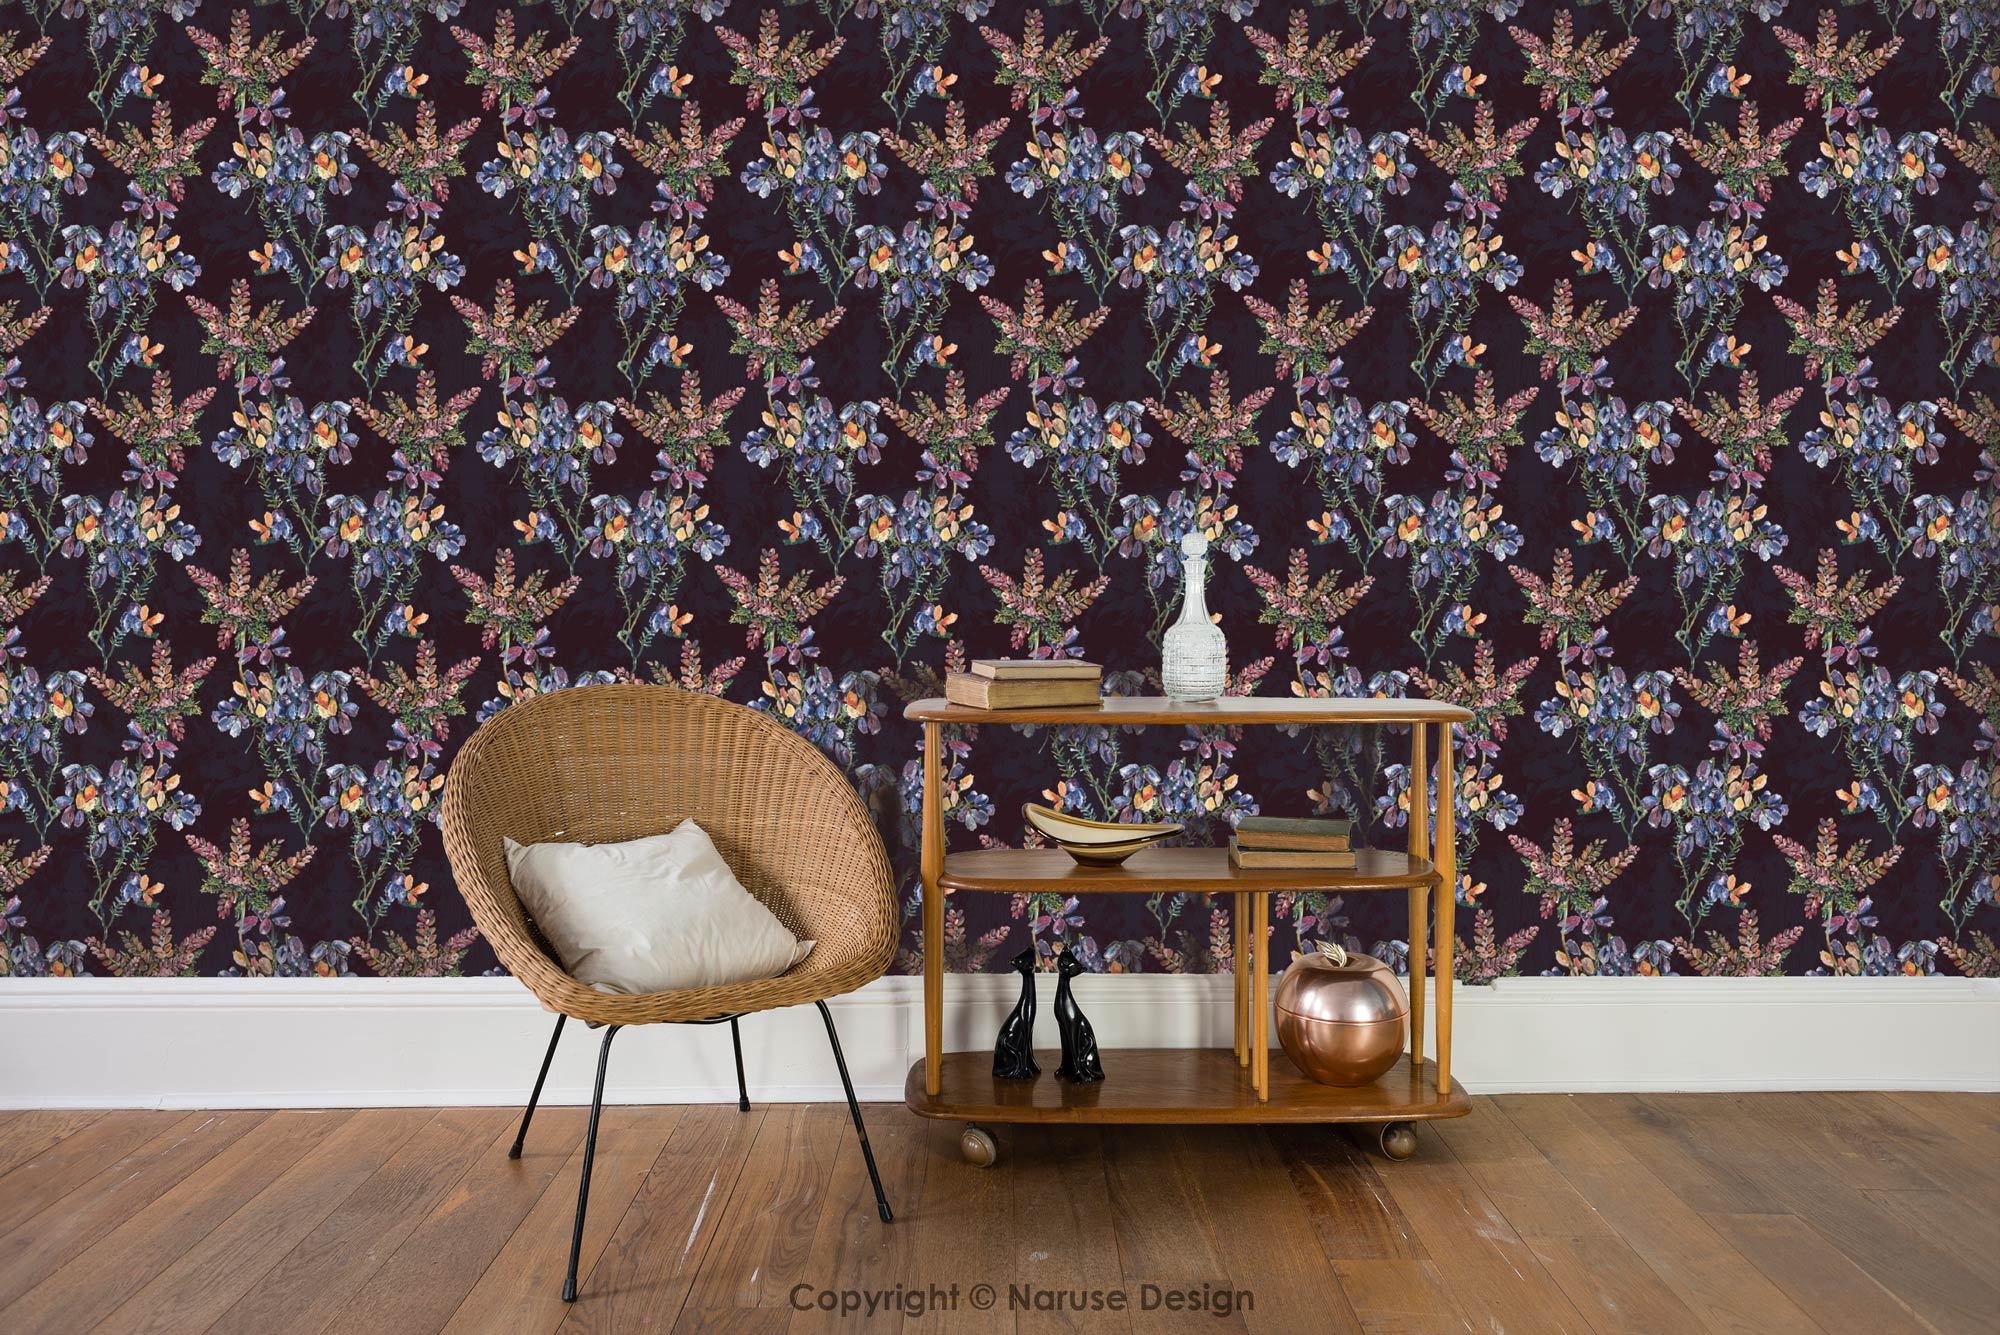 Wild heather wallpaper in the purple colourway representing on the wall of a modern living room with a woven chair and talbes with ornaments.